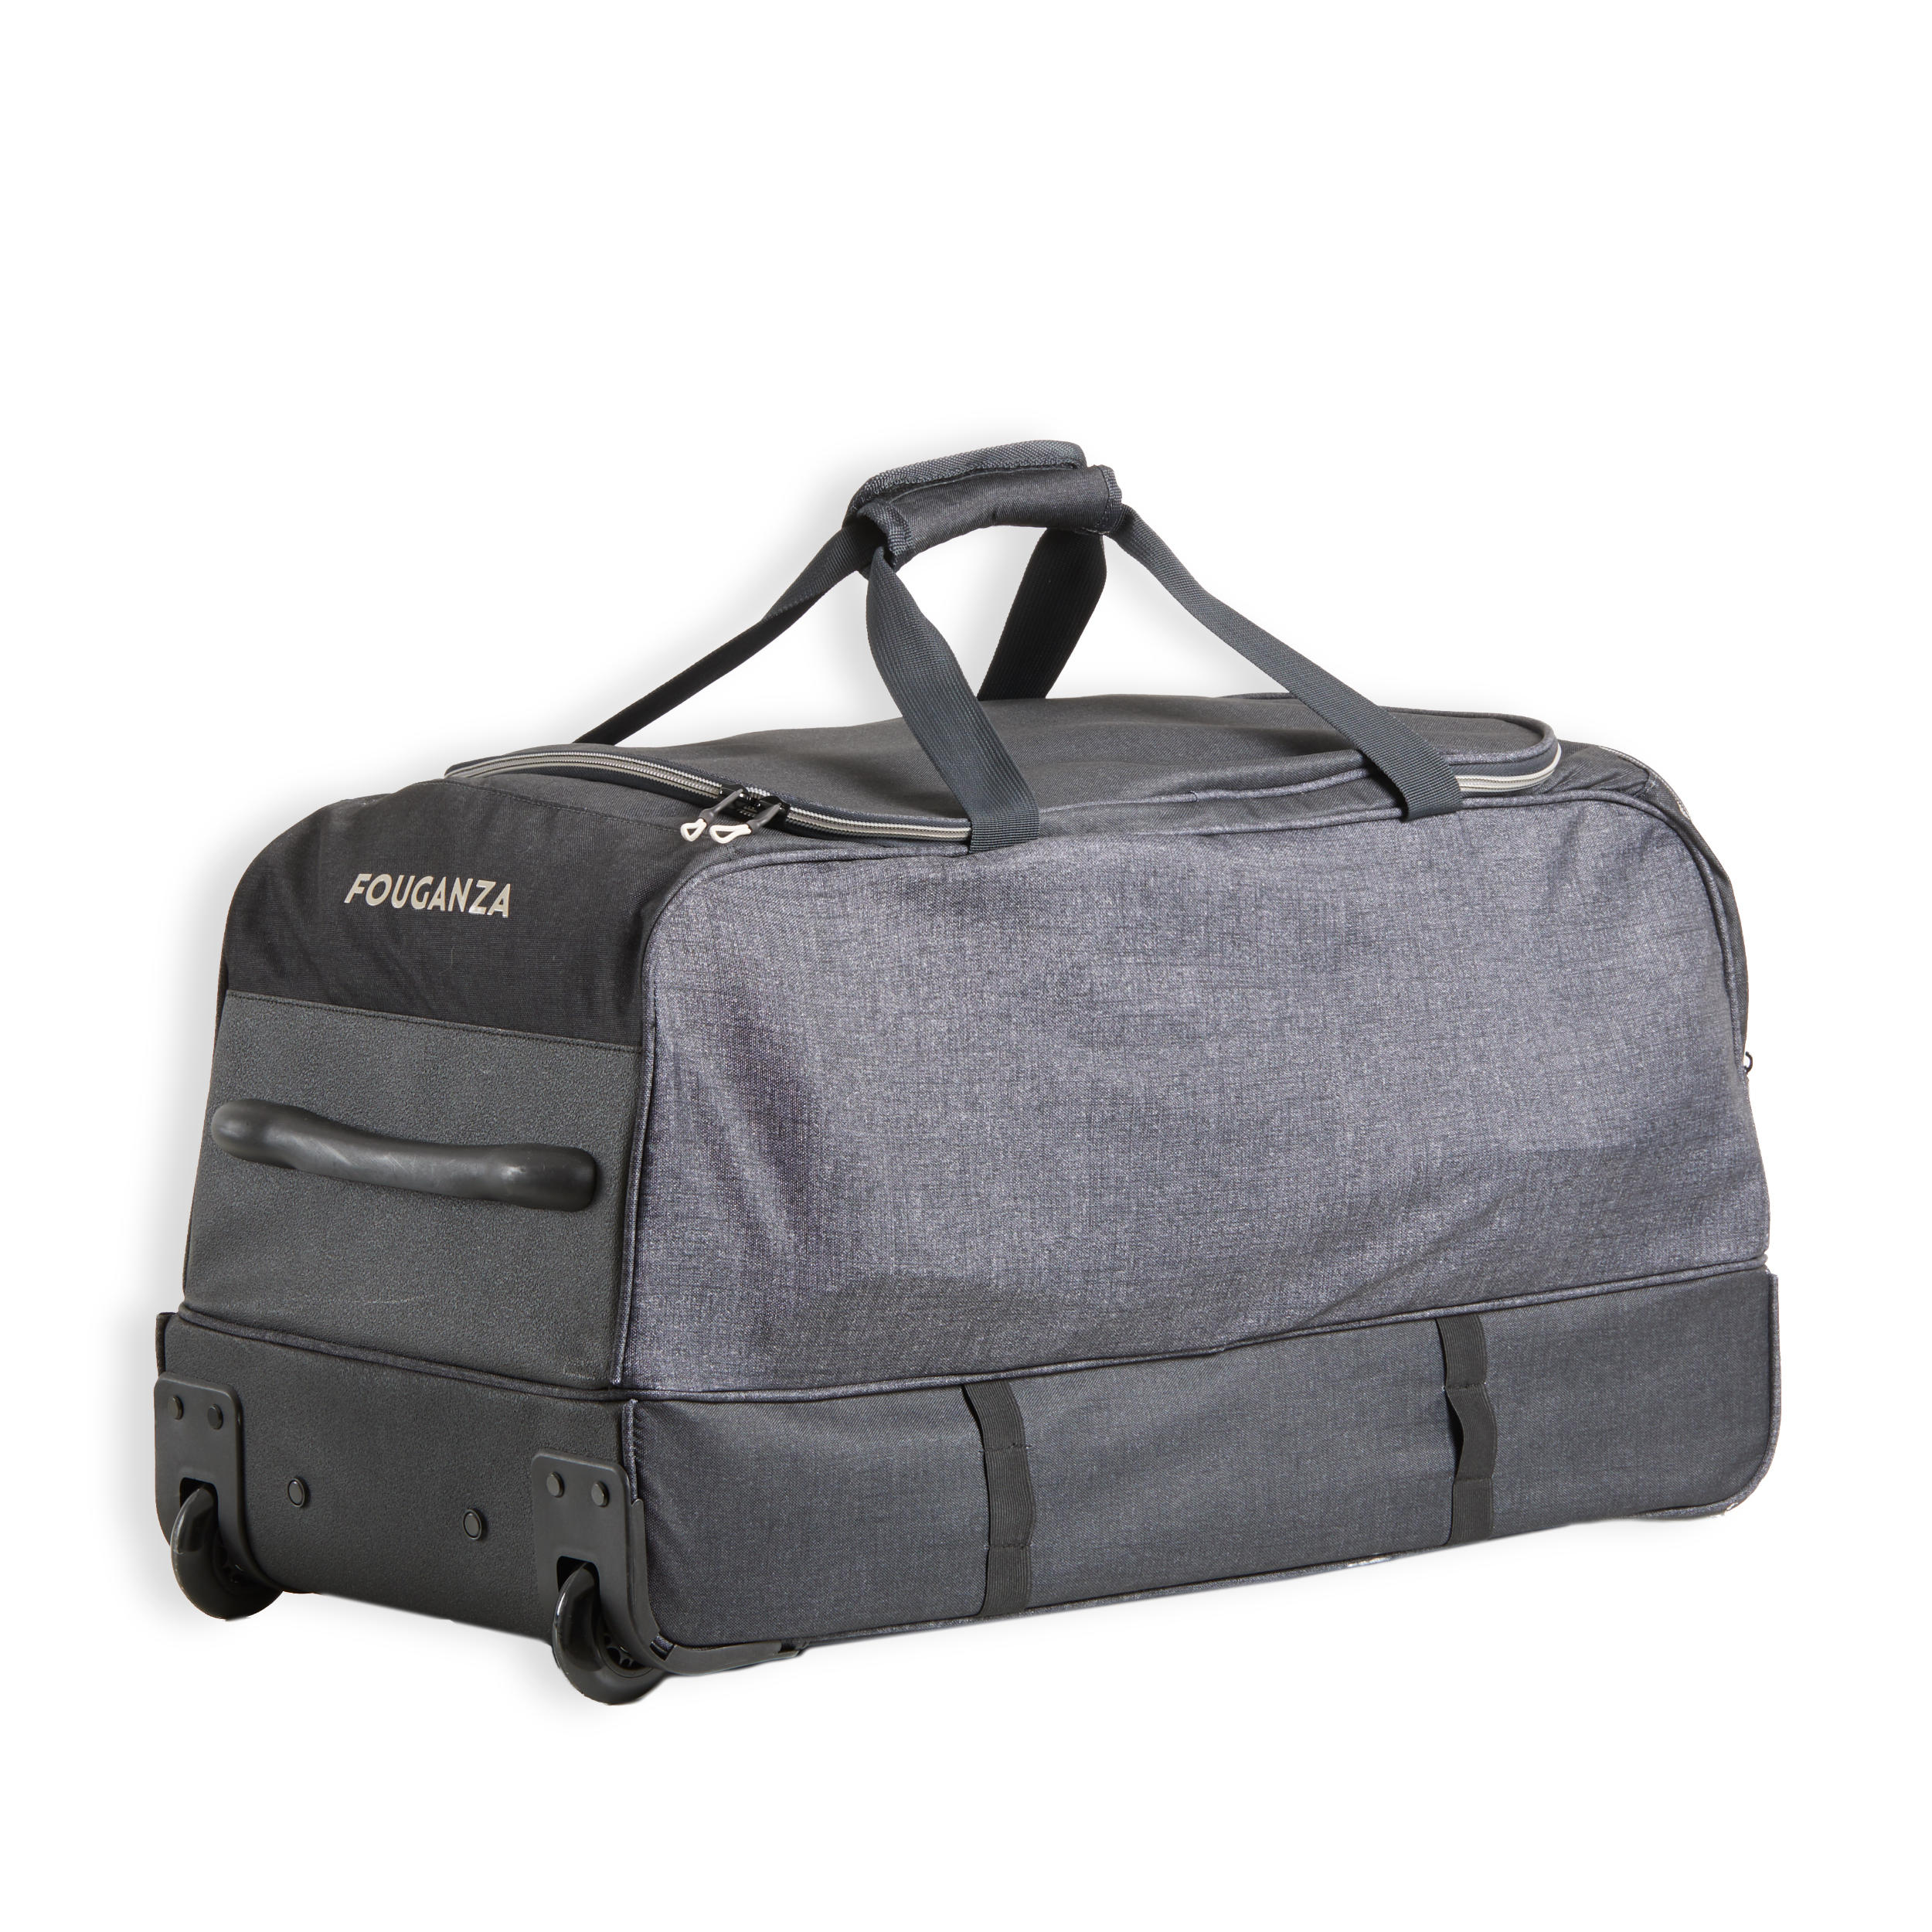 Horse Riding Trolley Bag 80 Litres - Grey/Beige 3/10